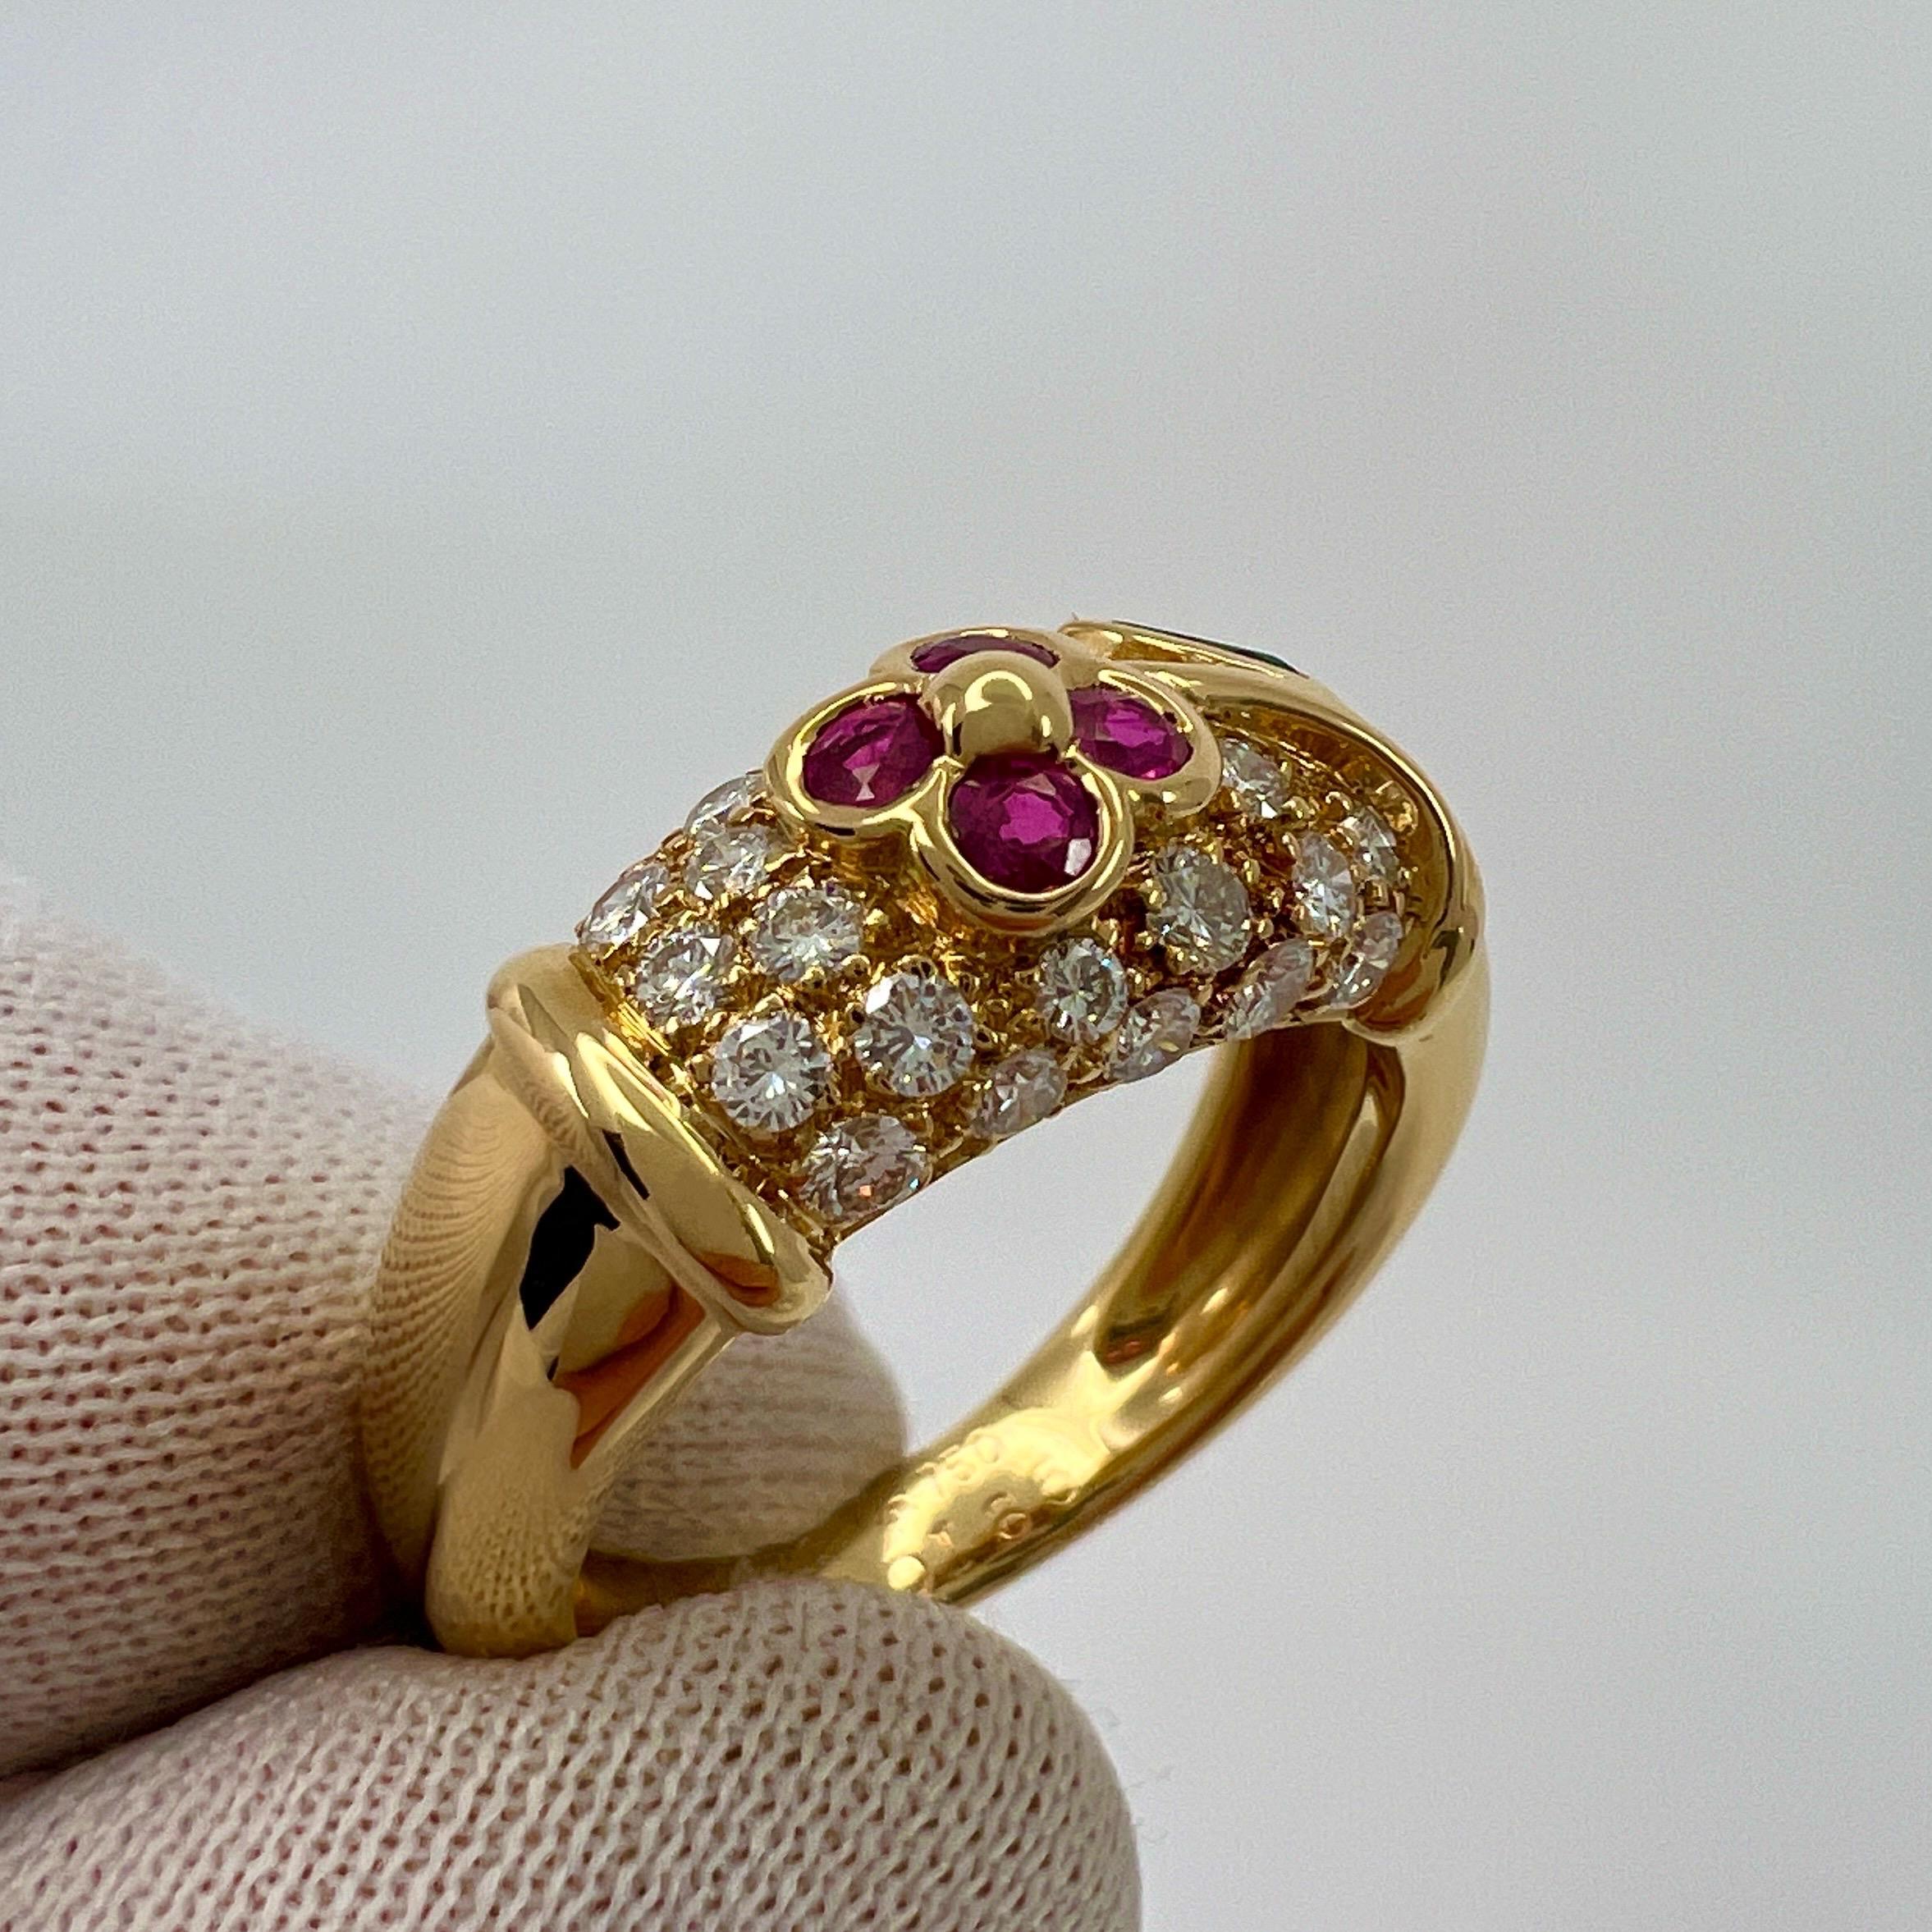 Rare Van Cleef & Arpels Ruby Emerald Diamond 18k Yellow Gold Floral Flower Ring For Sale 5